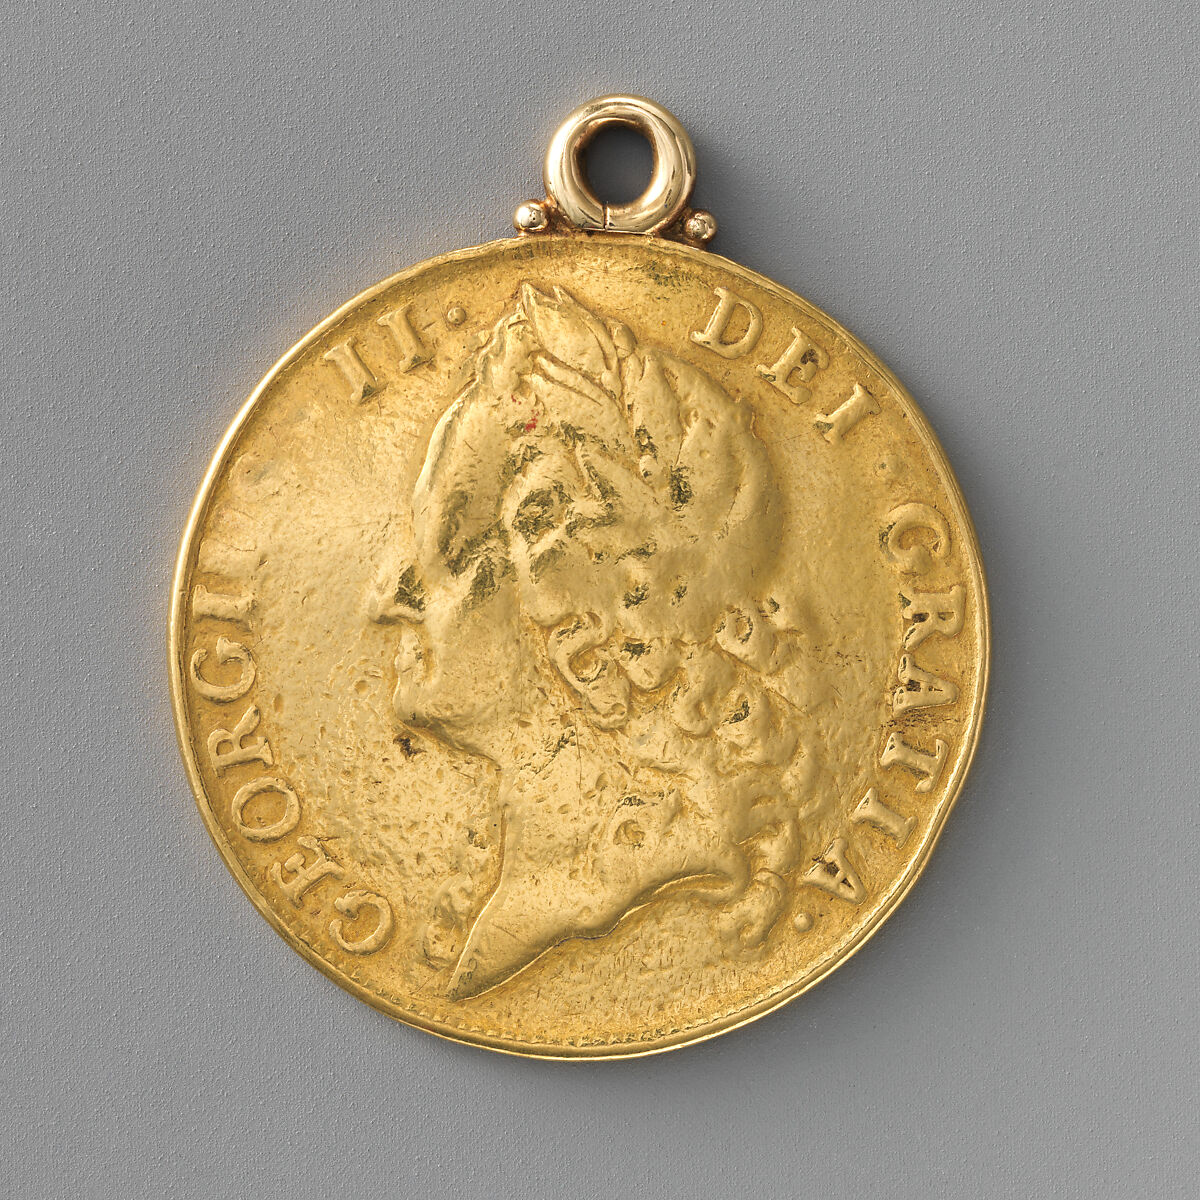 Two guinea piece of George II, 1740, Gold, British 